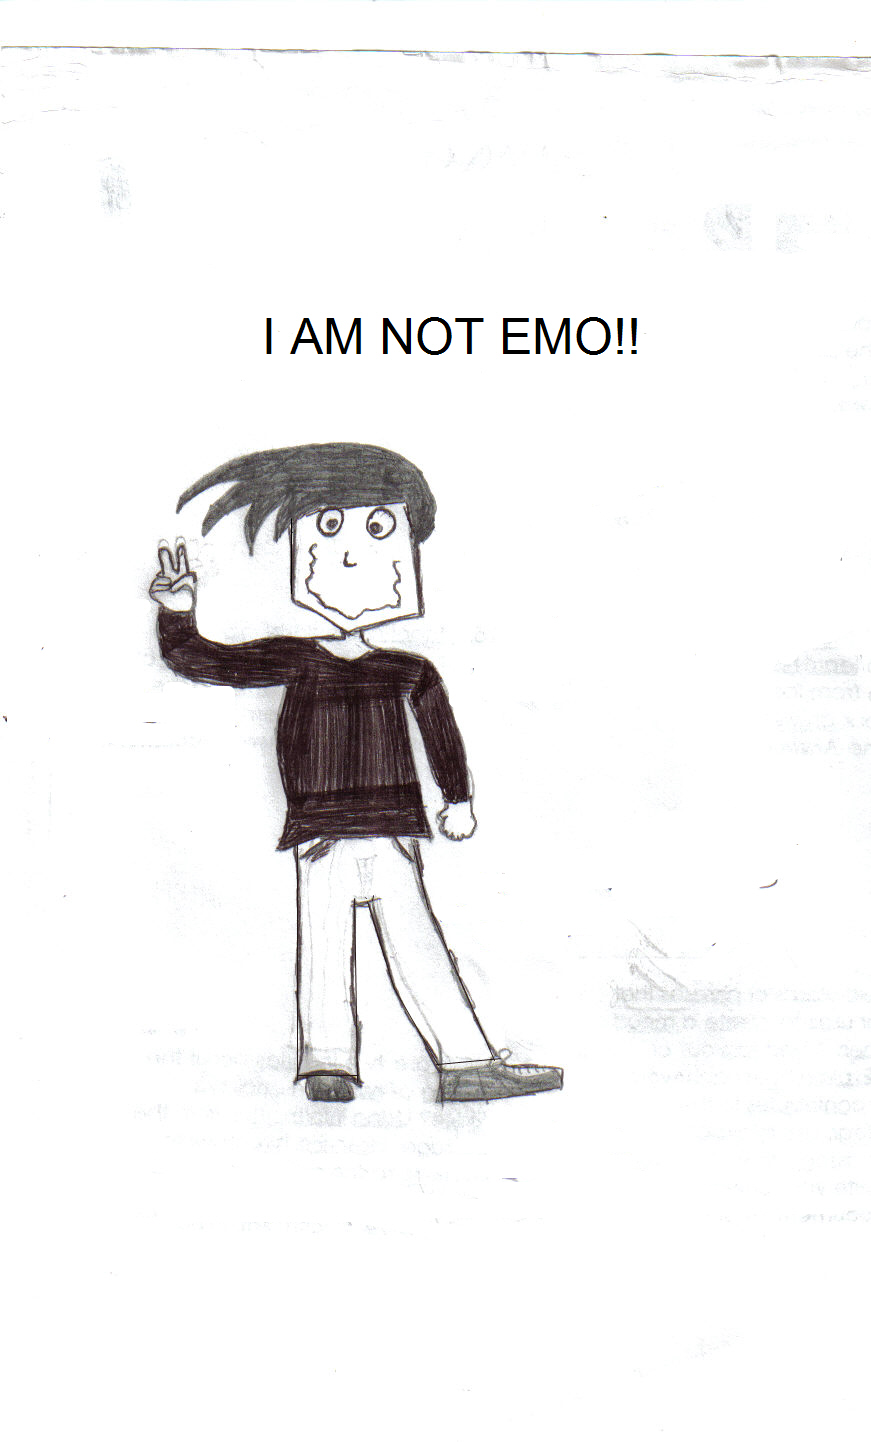 I'm not emo!!! by LacunaCoil_dudeO10